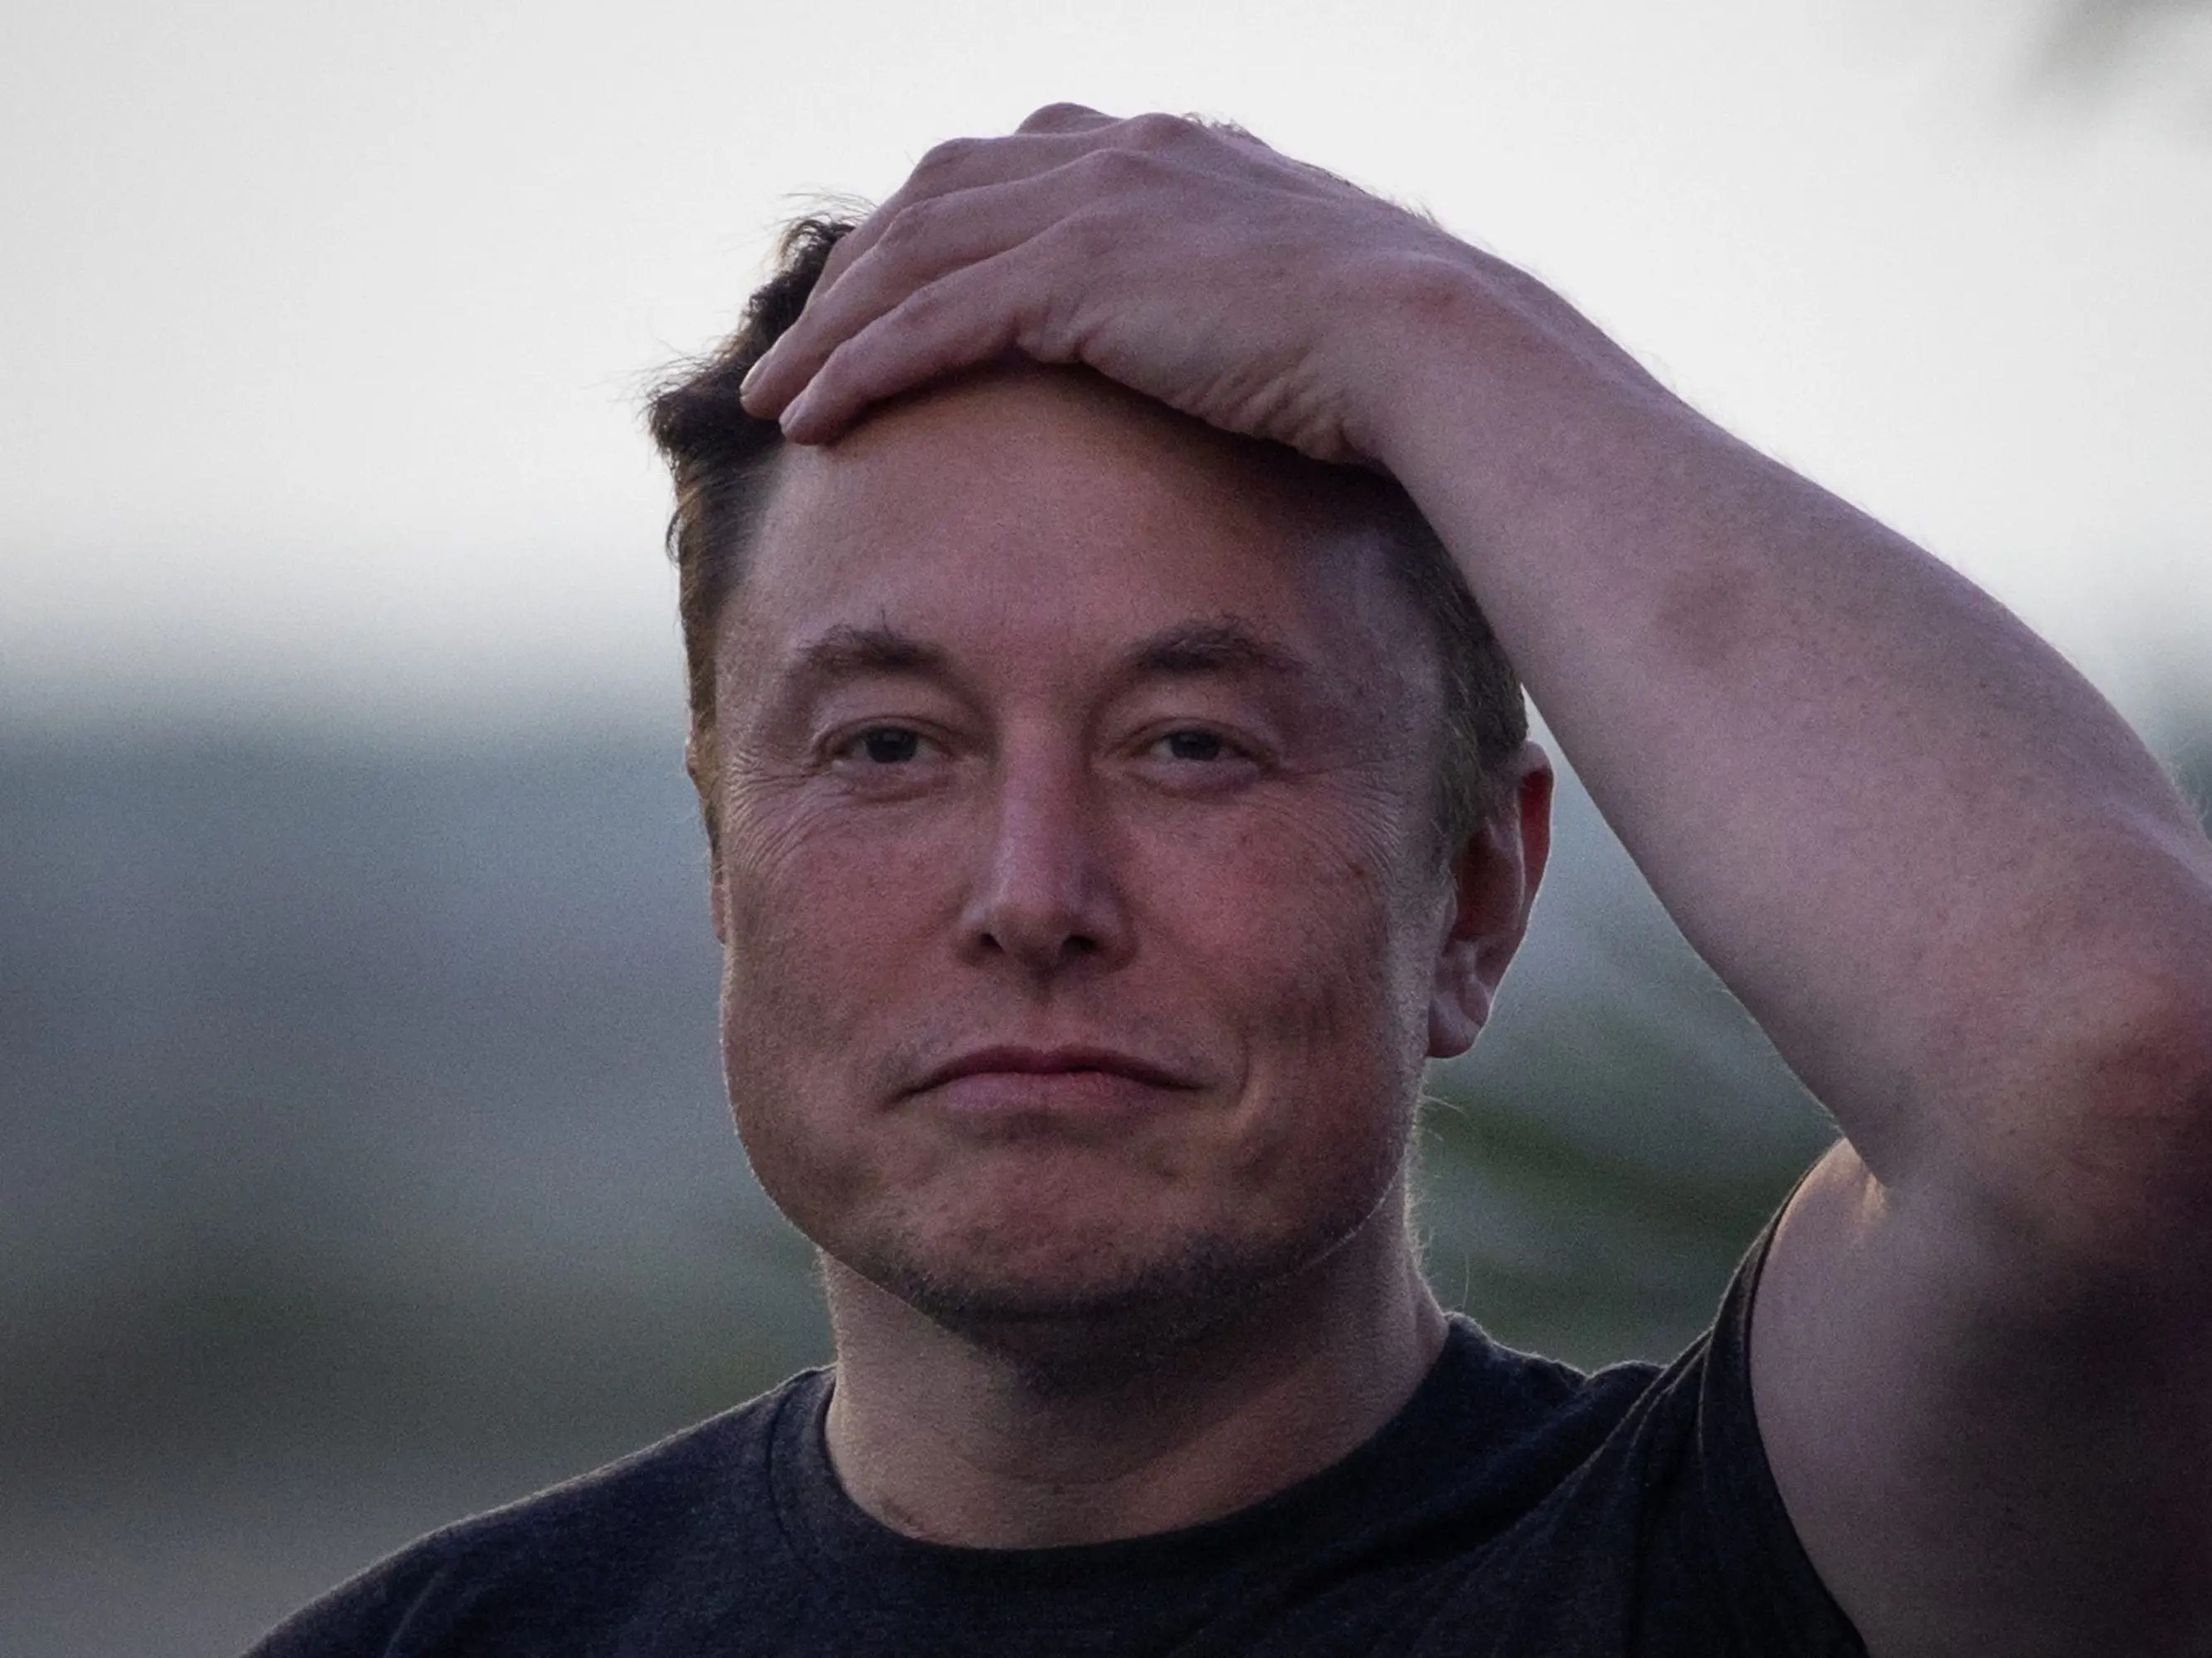 A picture of Elon Musk from the shoulders up. He's wearing a black t-shirt and clasping his left hand to his head with a calm expression on his face.